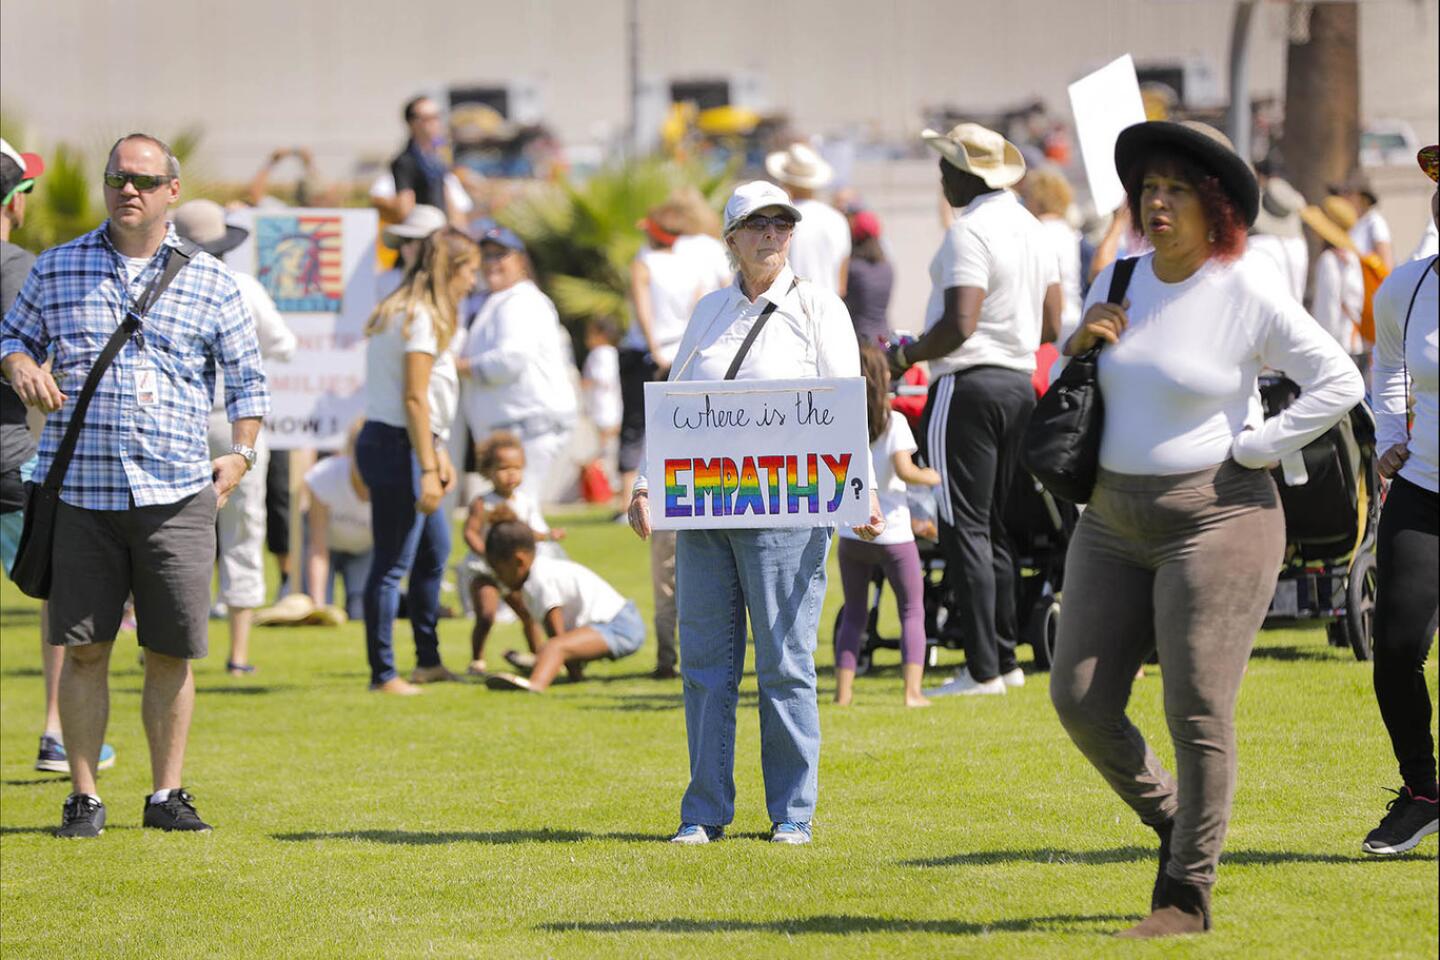 Families Belong Together Carlsbad rally